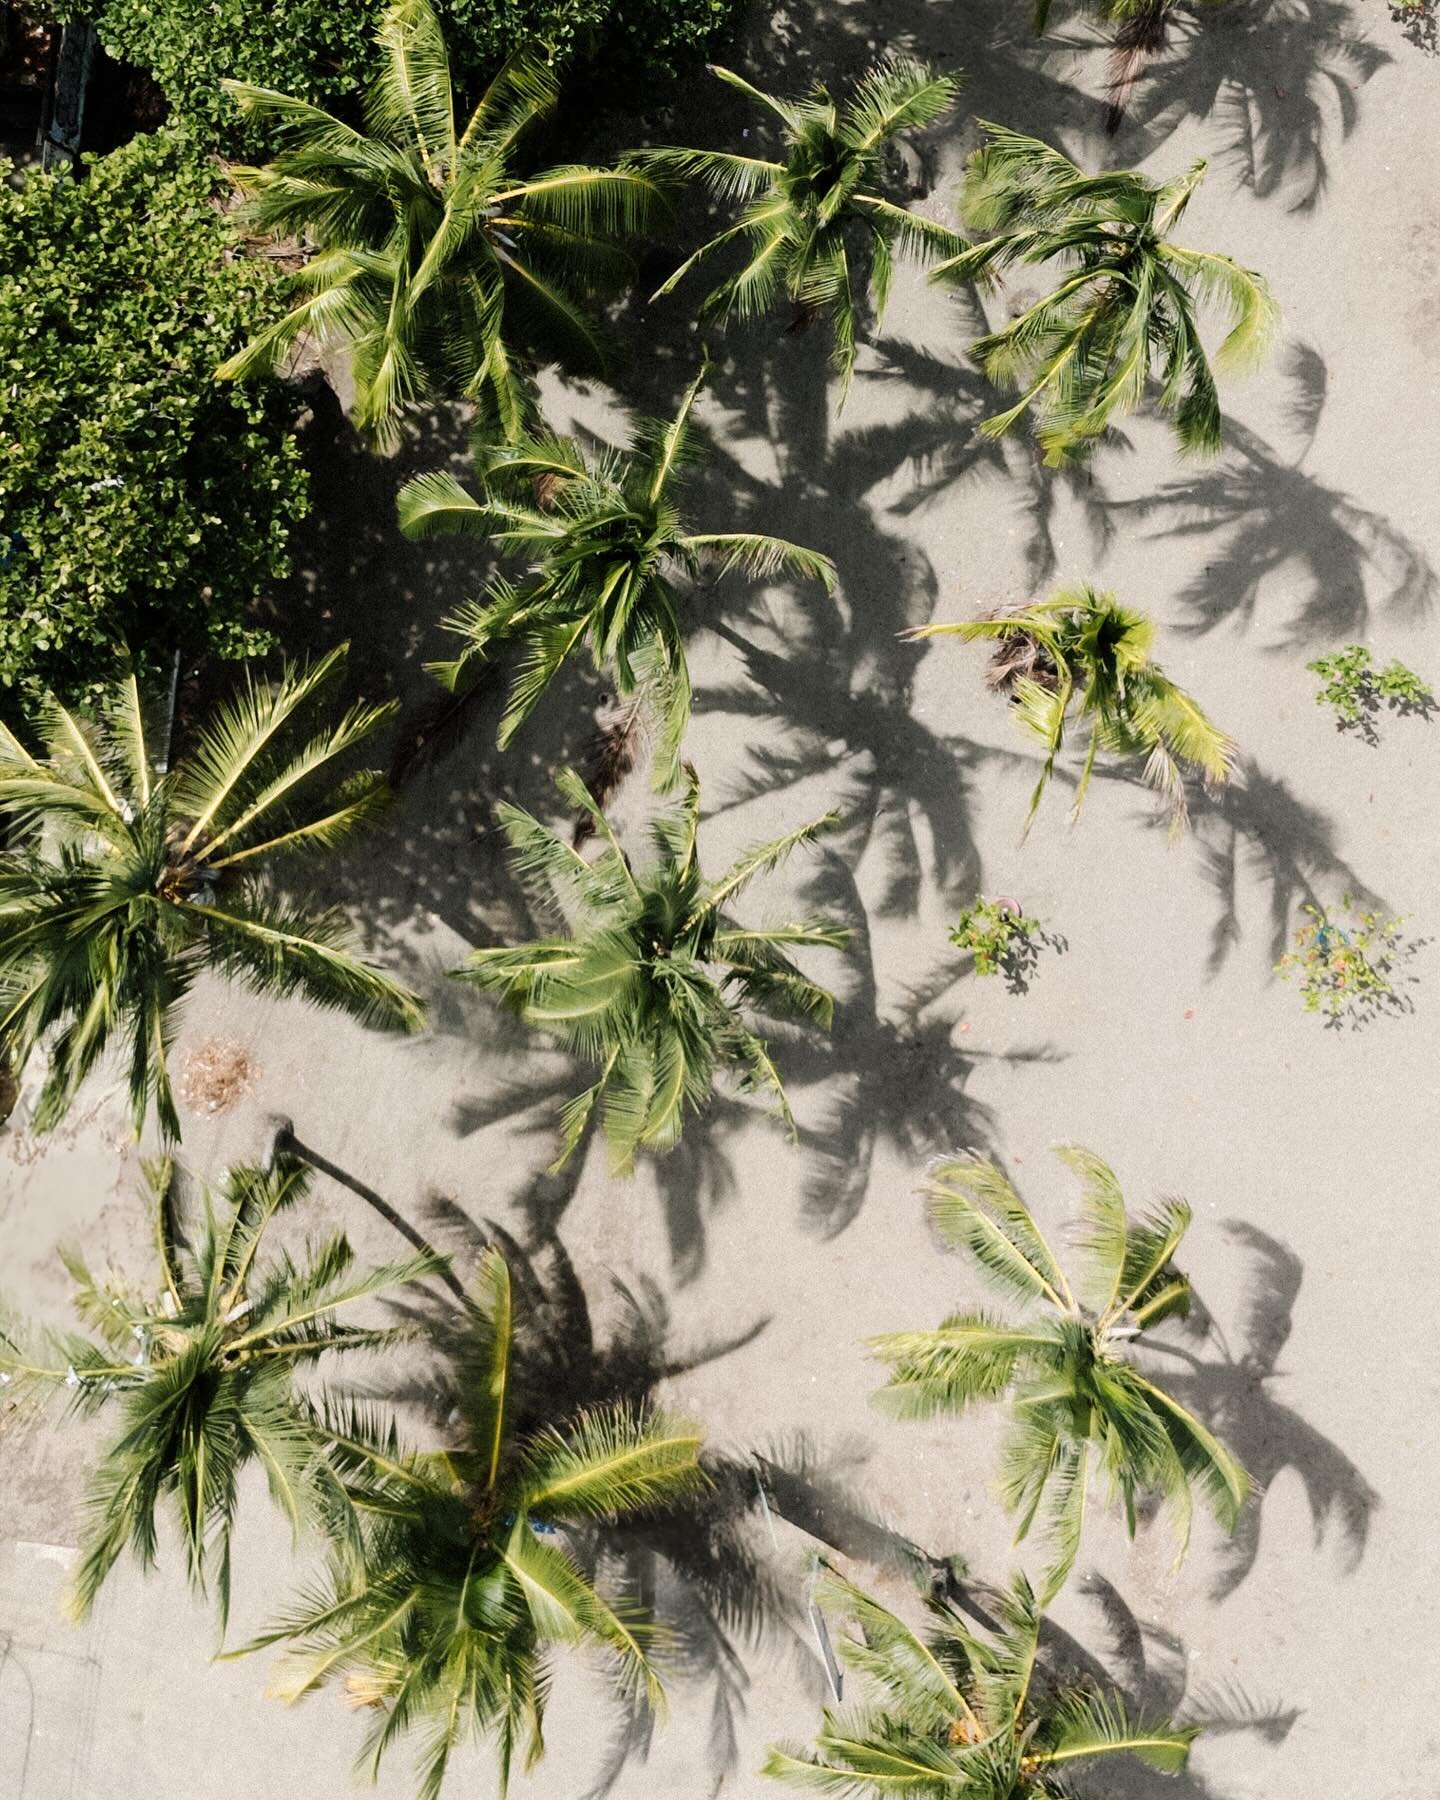 Coco trees from above by my love @larisastingaphotography 🤍
&bull;
Cant wait to celebrate our beautiful K &amp; H with amazing @hummingbirdwed